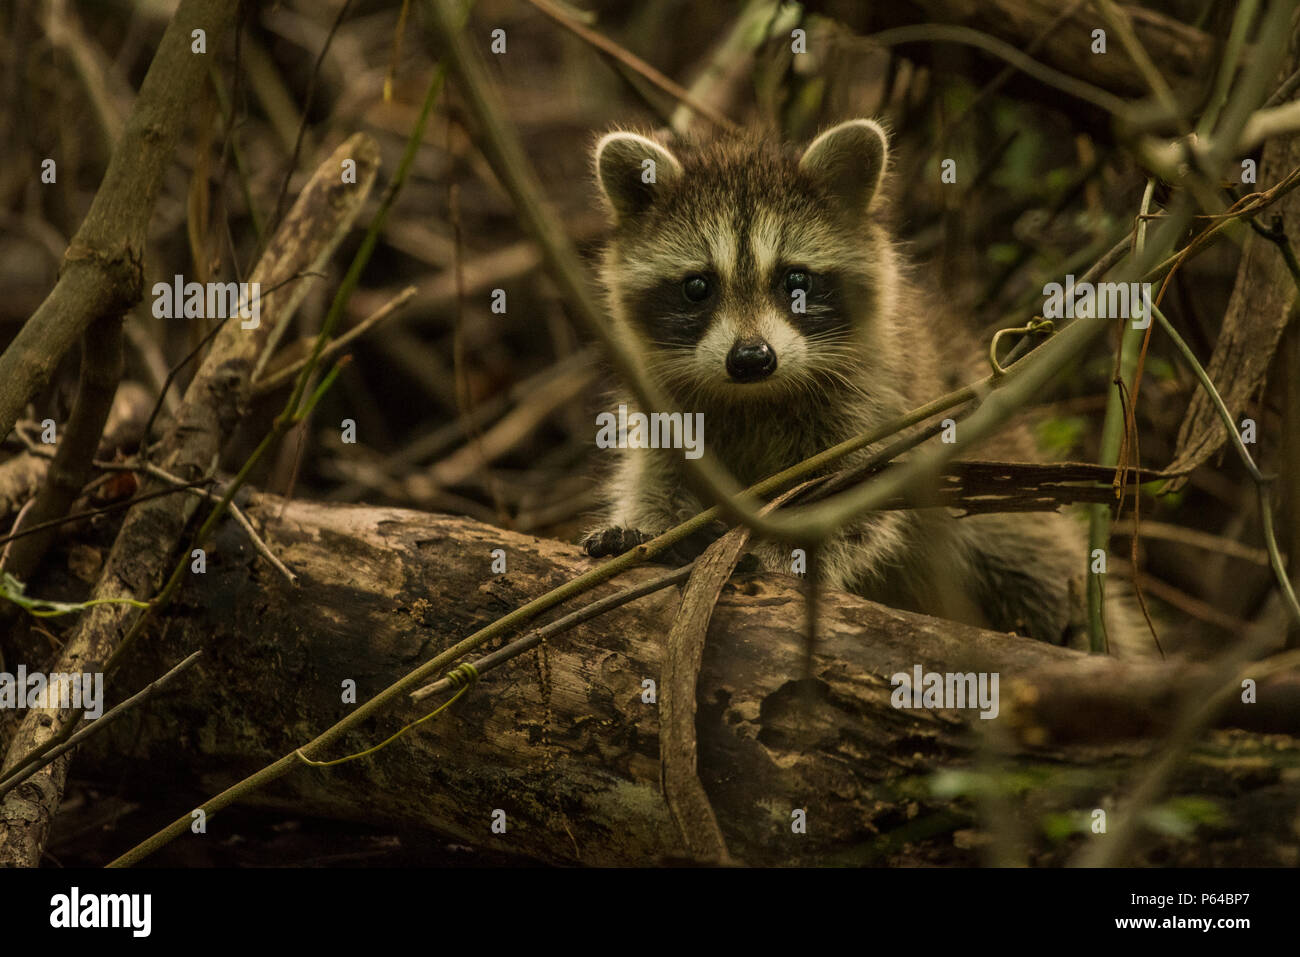 A incredible cute baby northern raccoon (Procyon lotor) from Eastern North Carolina. It briefly peeked out of the wood pile it was sheltering in. Stock Photo